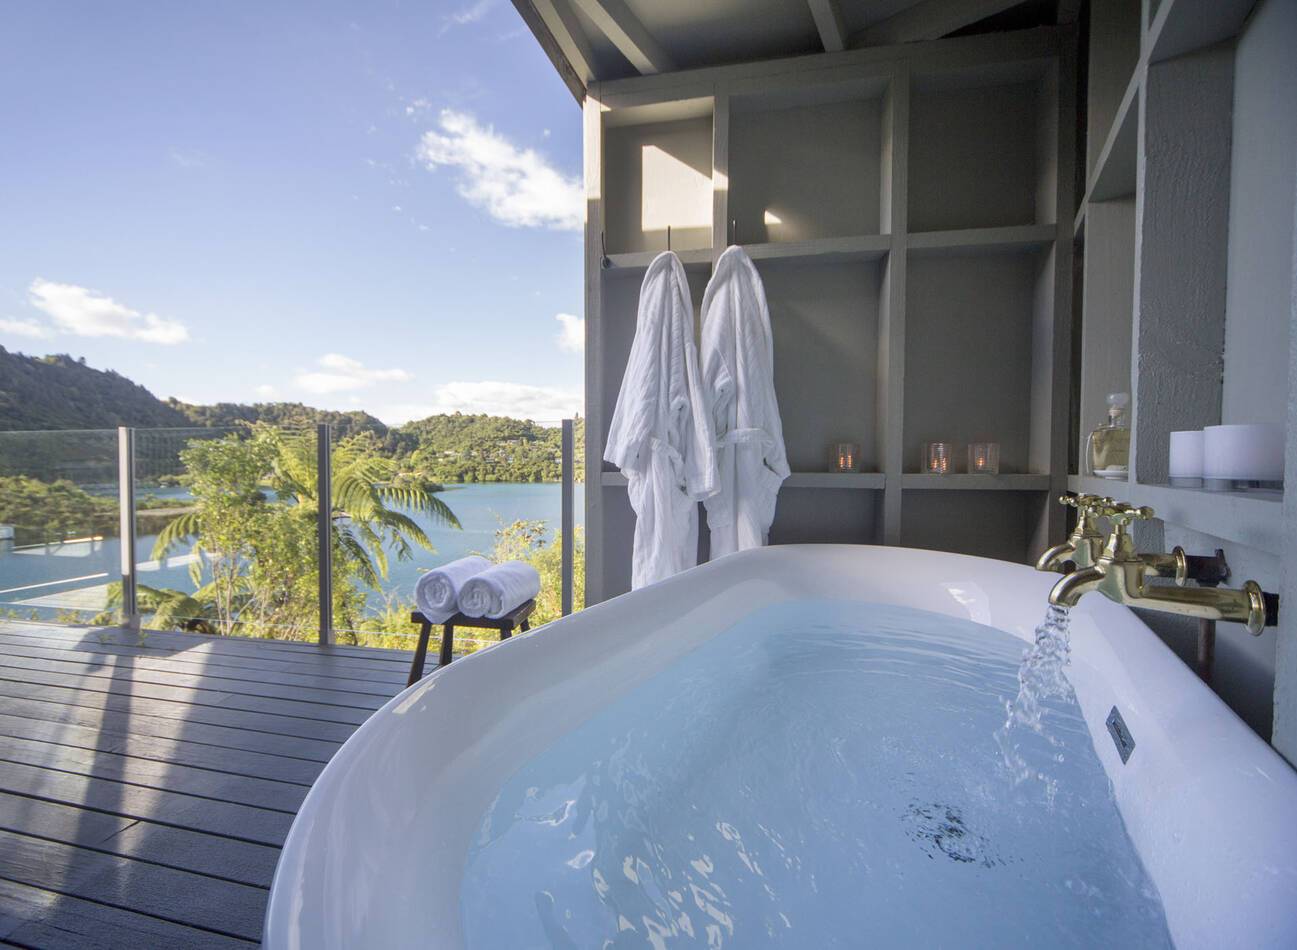 Solitaire Lodge New Zealand Salle Bains